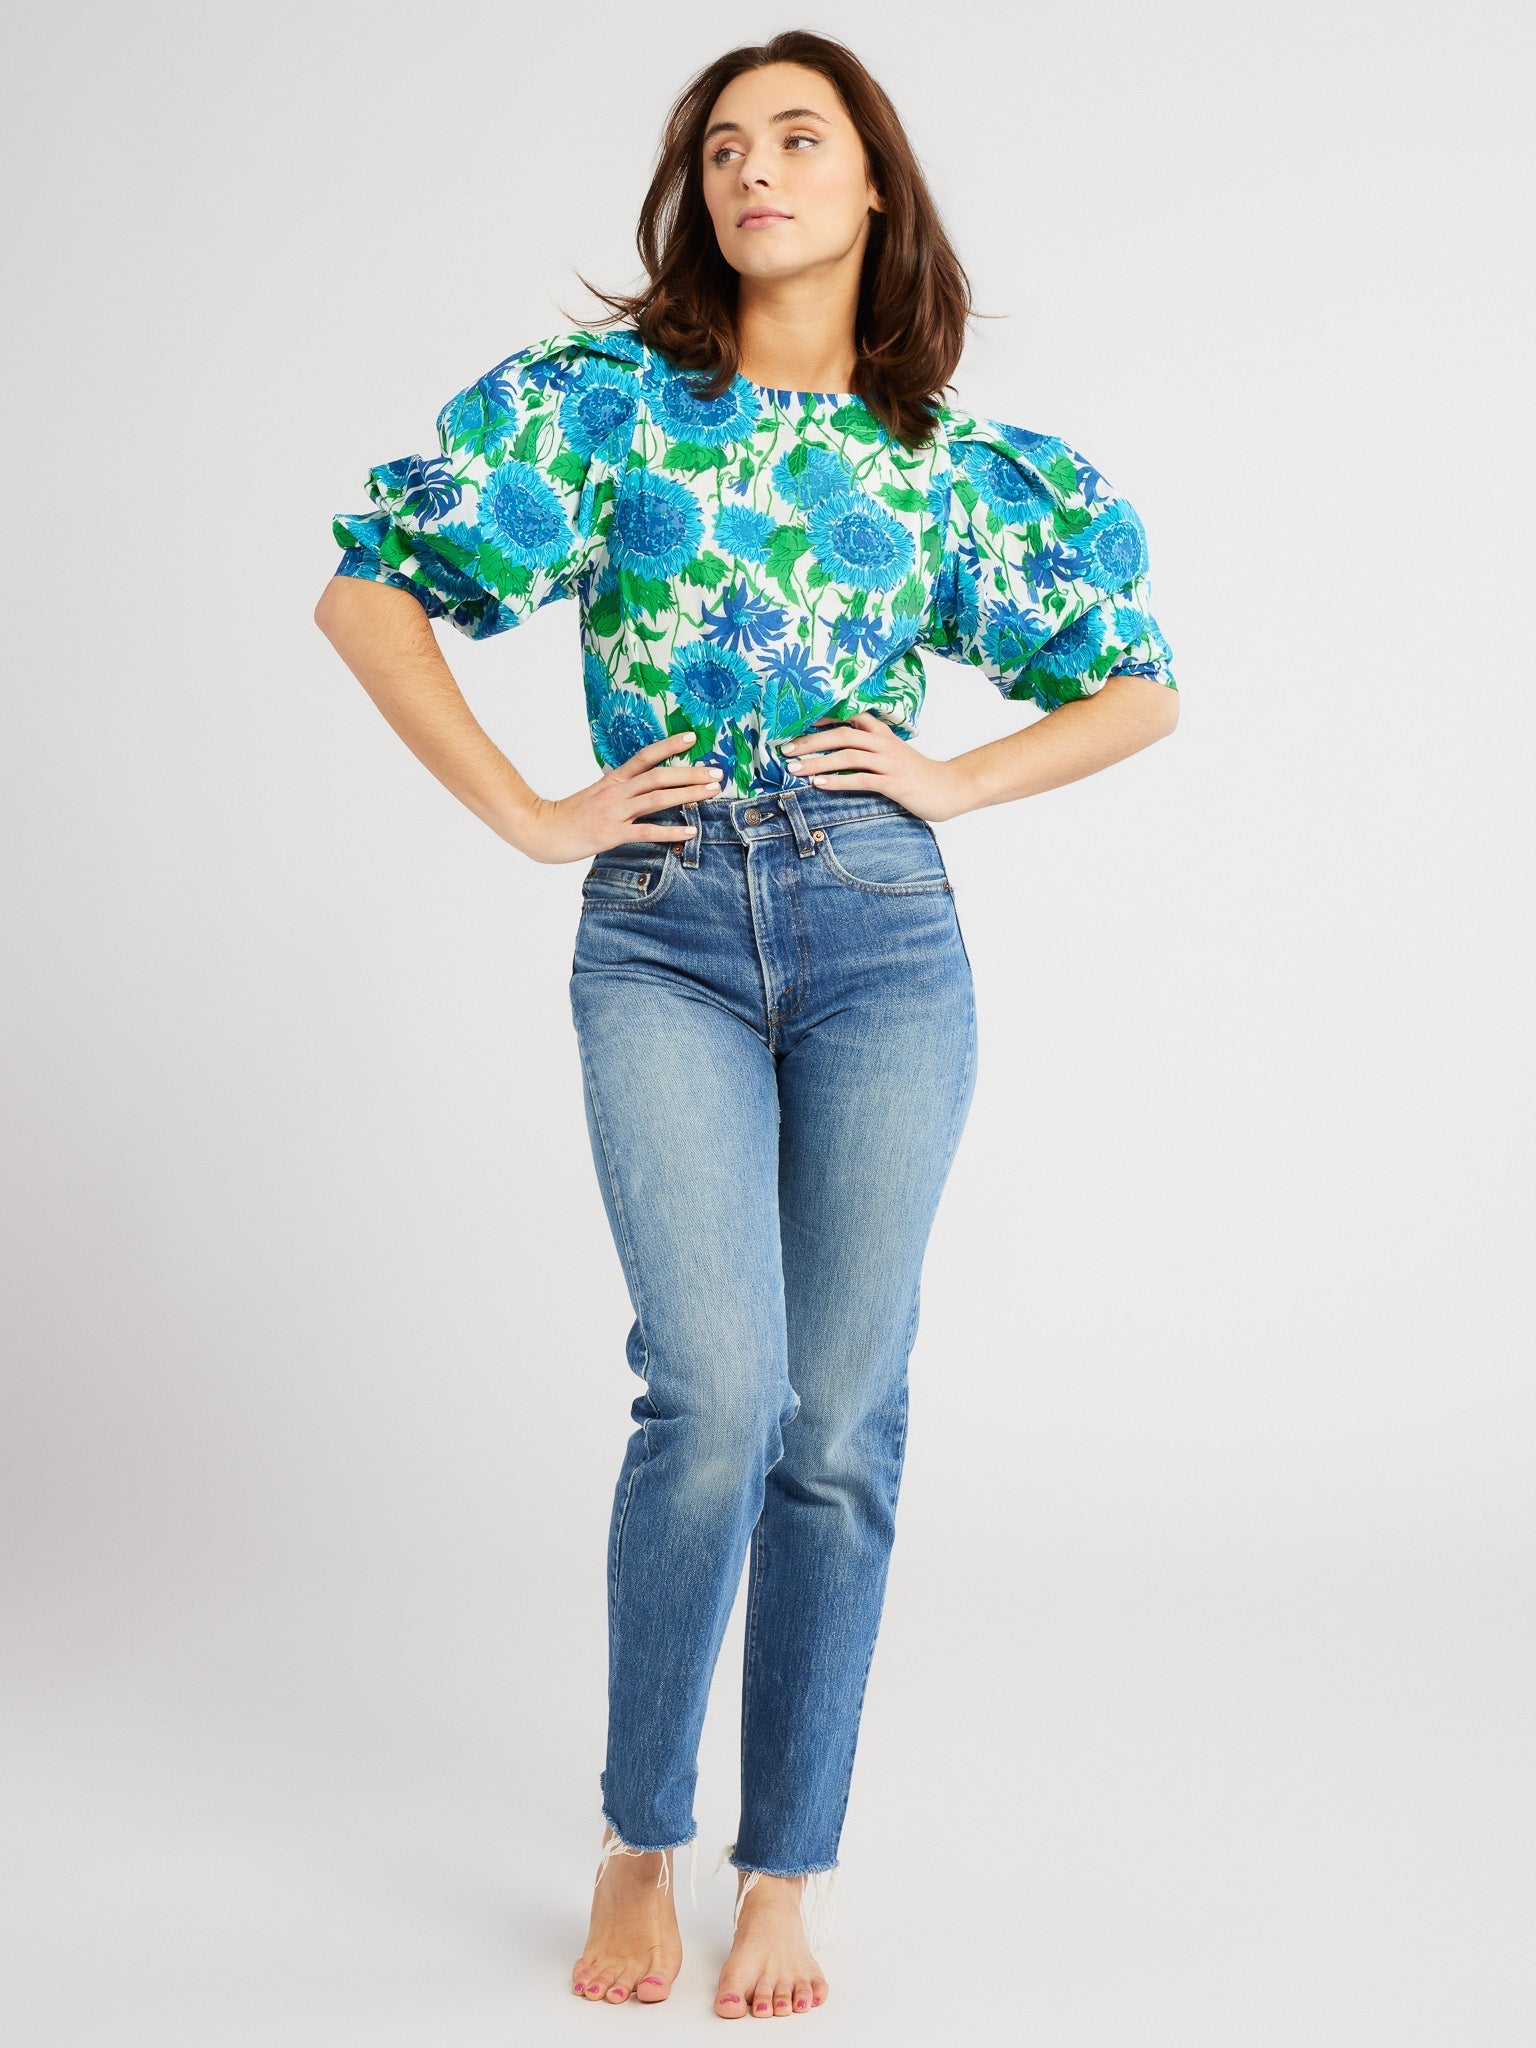 MILLE Clothing Lila Top in Cornflower